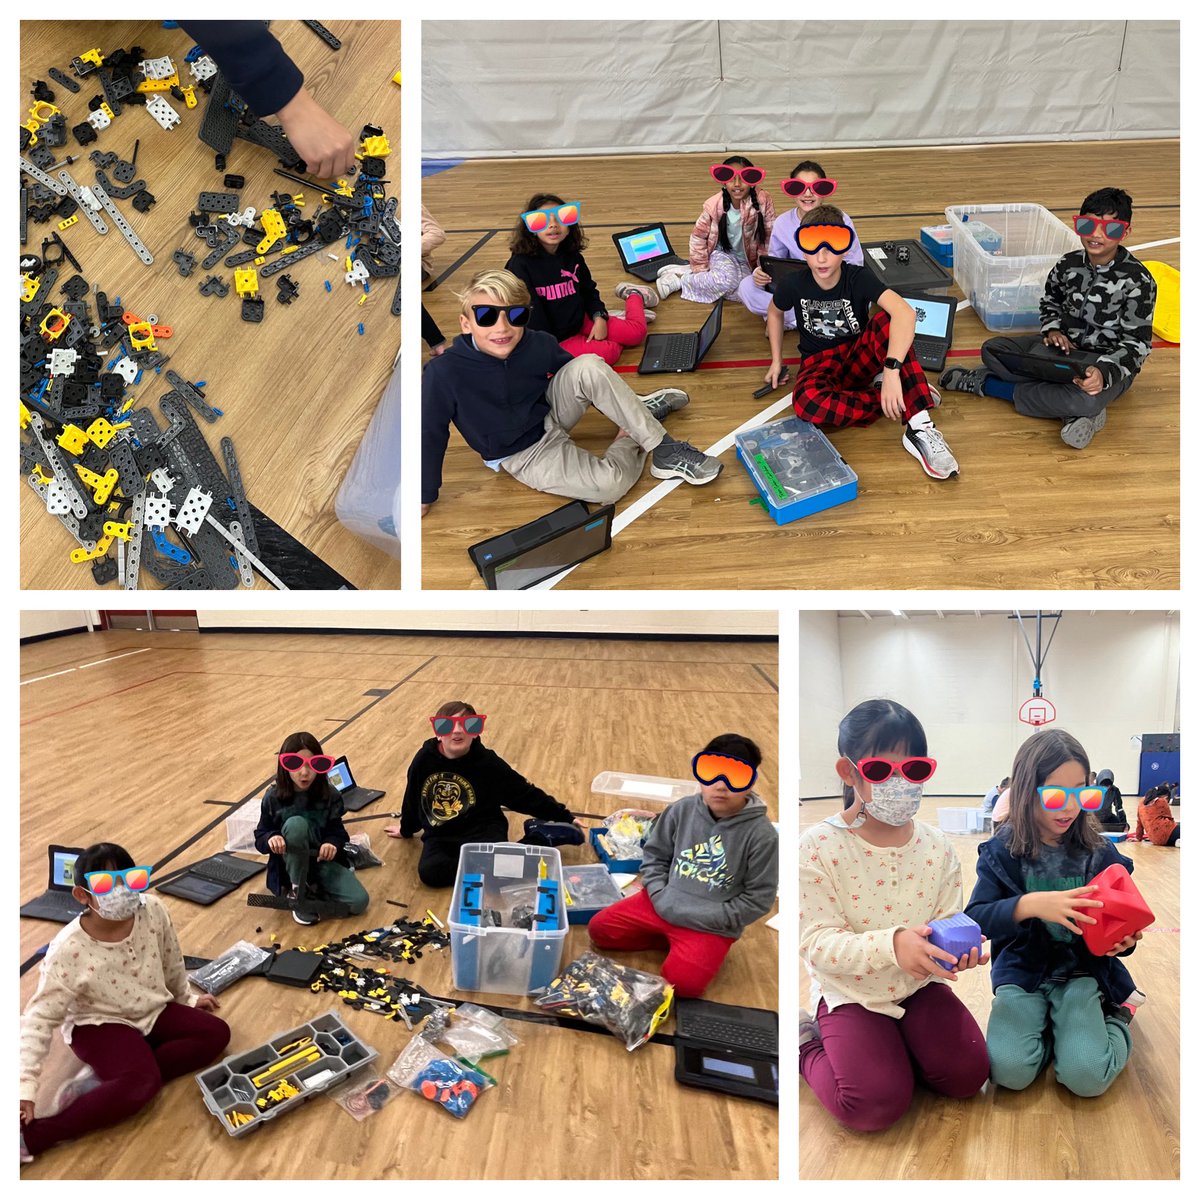 Our Robotics Teams @CowlishawKoalas learned the rules for this year’s Full Volume competition @VEXRobotics #VexIQ. Three different block sizes will present a unique design challenge for these engineers as they design their robots 🤖! @ipef204 @briangio3 @BookCreatorApp @IPSD_WOW